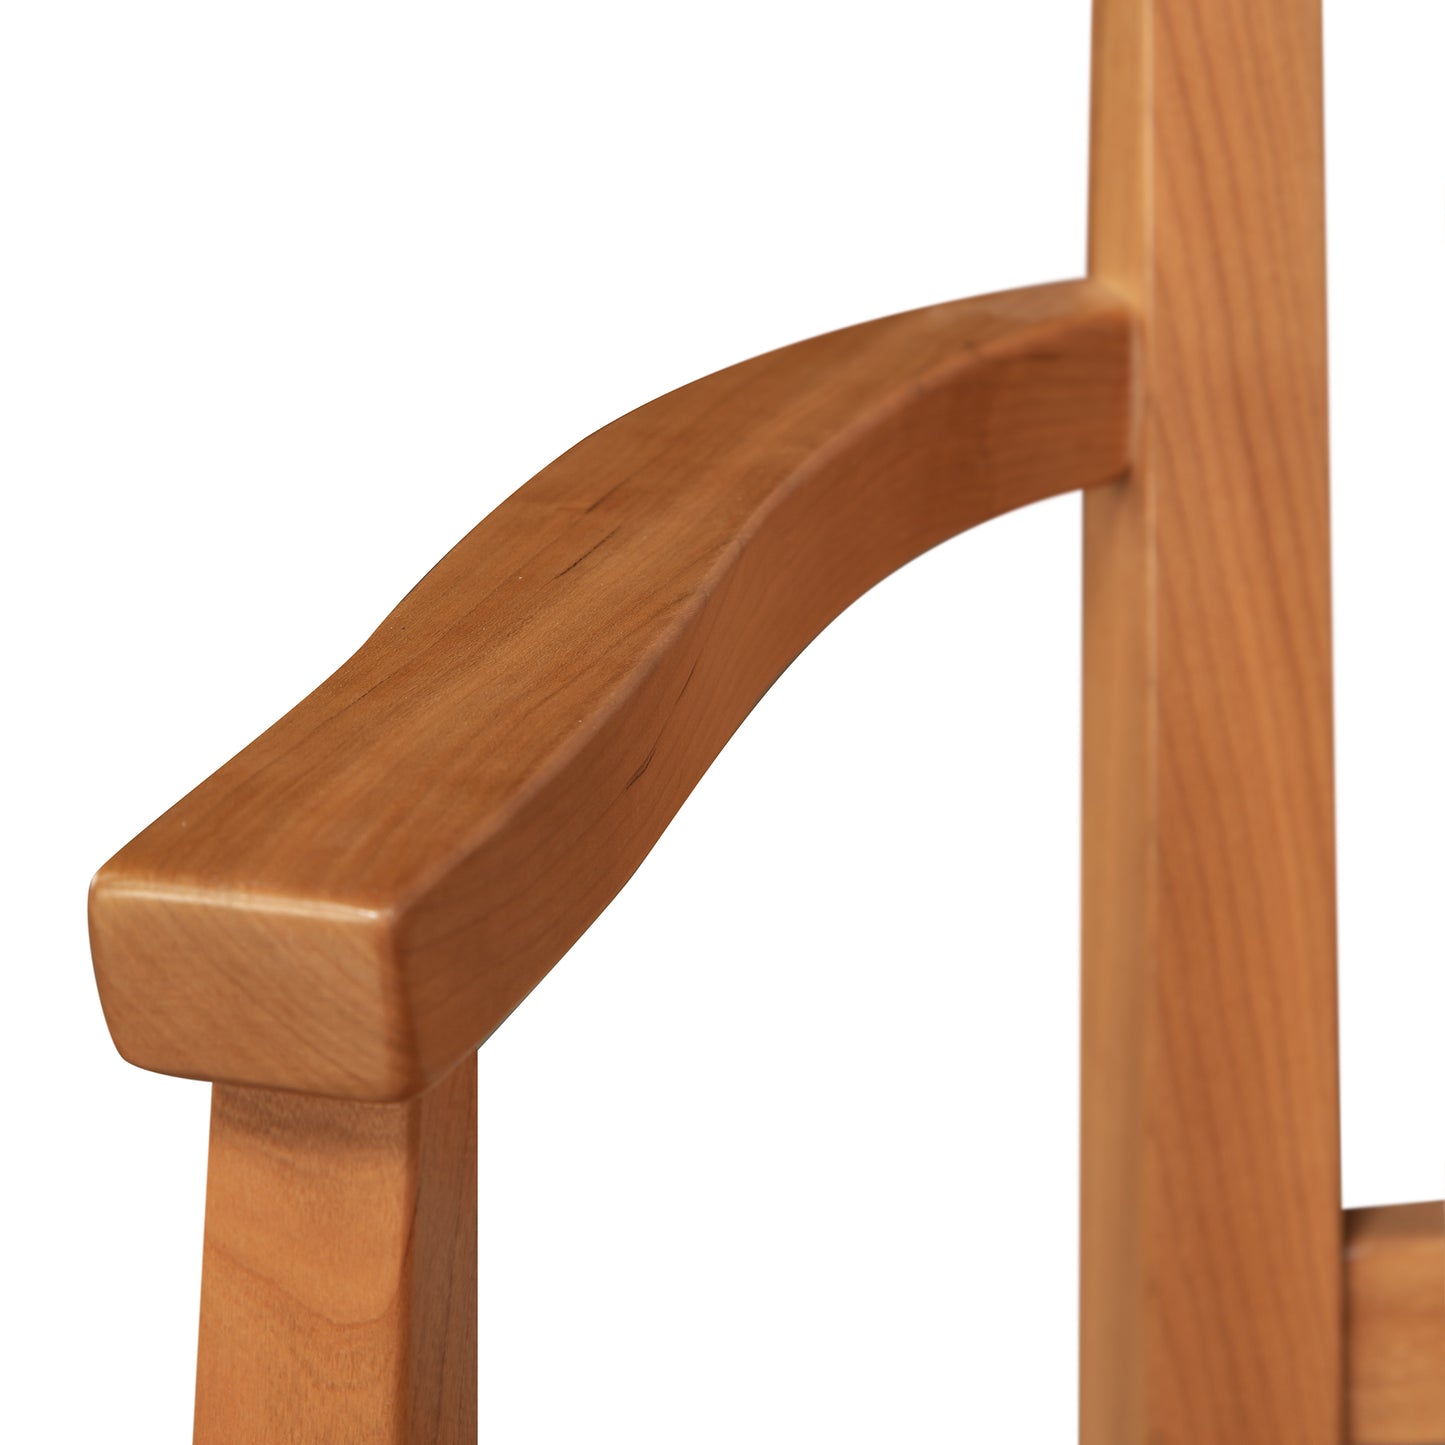 Close-up of the armrest and backrest of a Vermont Woods Studios Contemporary Shaker Chair, showing the smooth finish and natural wood grain.